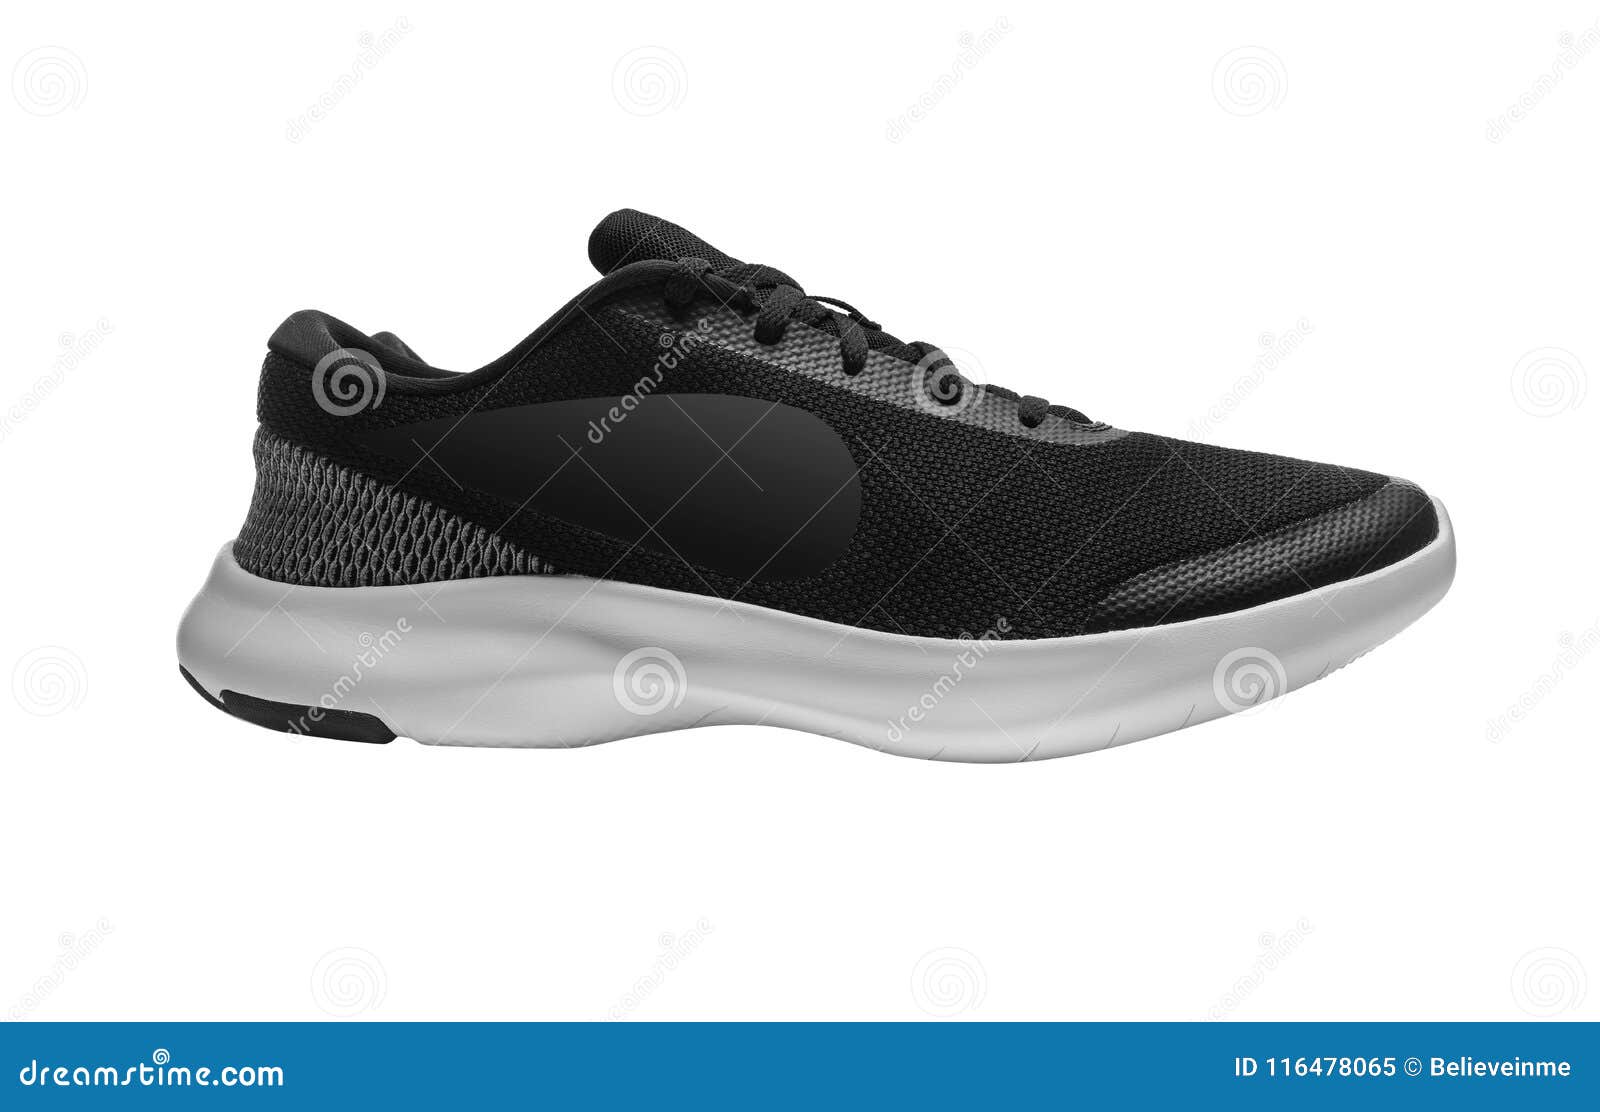 Sport Shoes Isolated on White Background Stock Image - Image of healthy ...